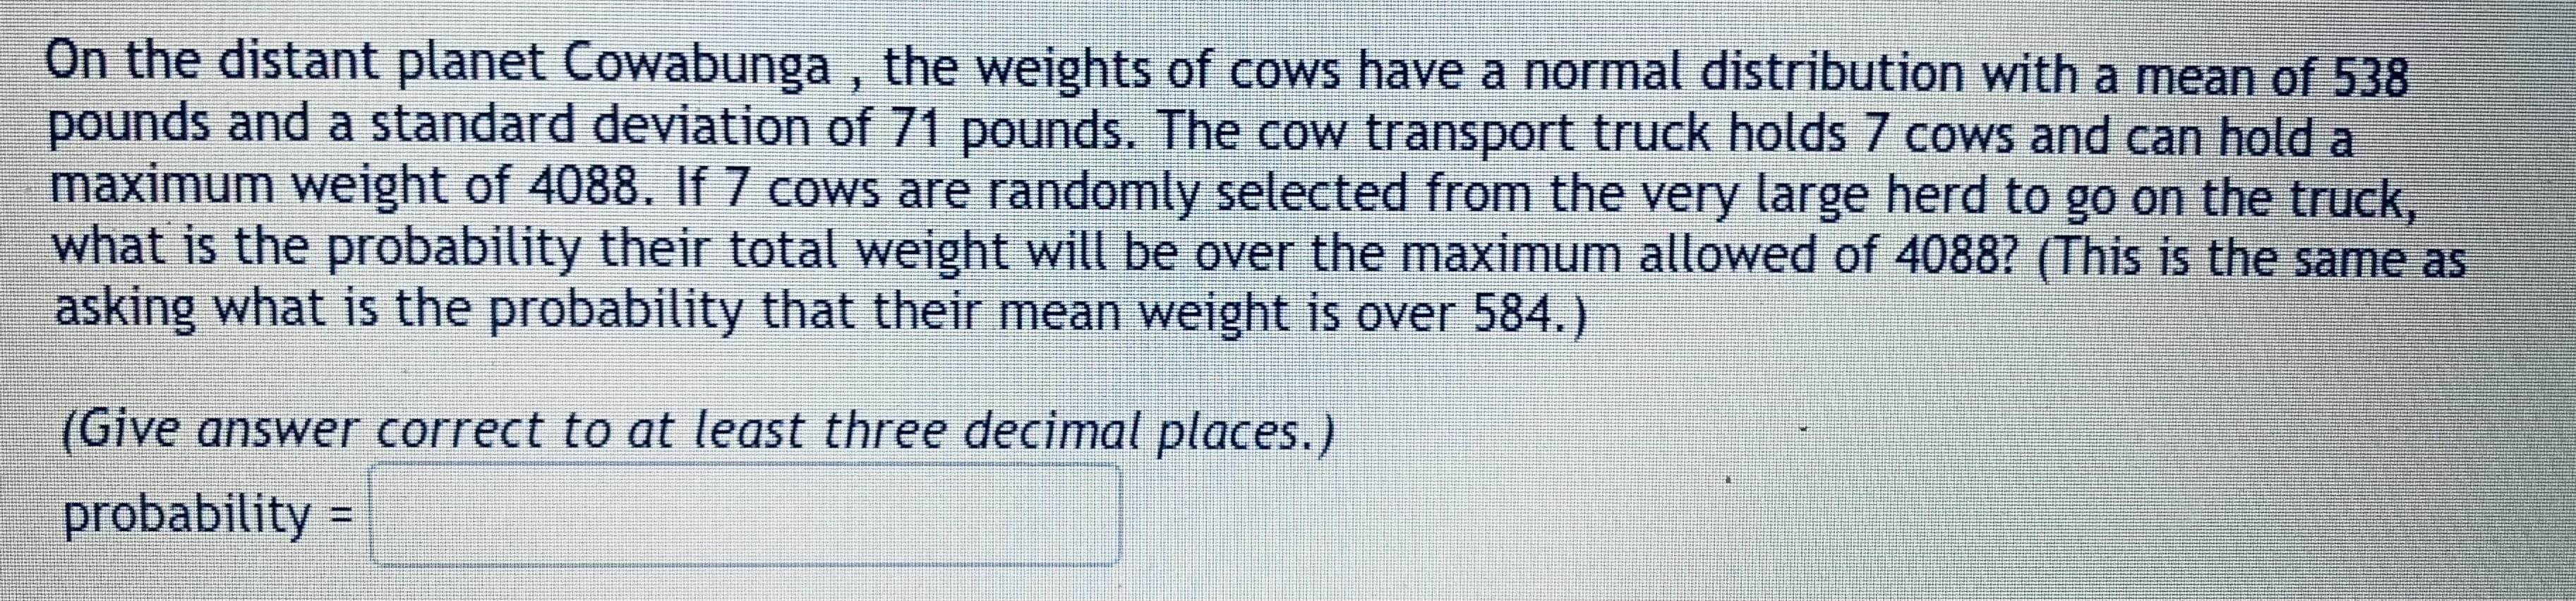 On the distant planet Cowabunga, the weights of cows have a normal distribution with a mean of 538
pounds and a standard deviation of 71 pounds. The cow transport truck holds 7 cows and can hold a
maximum weight of 4088. If 7 cows are randomly selected from the very large herd to go on the truck,
what is the probability their total weight will be over the maximum allowed of 4088? (This is the same as
asking what is the probability that their mean weight is over 584.)
